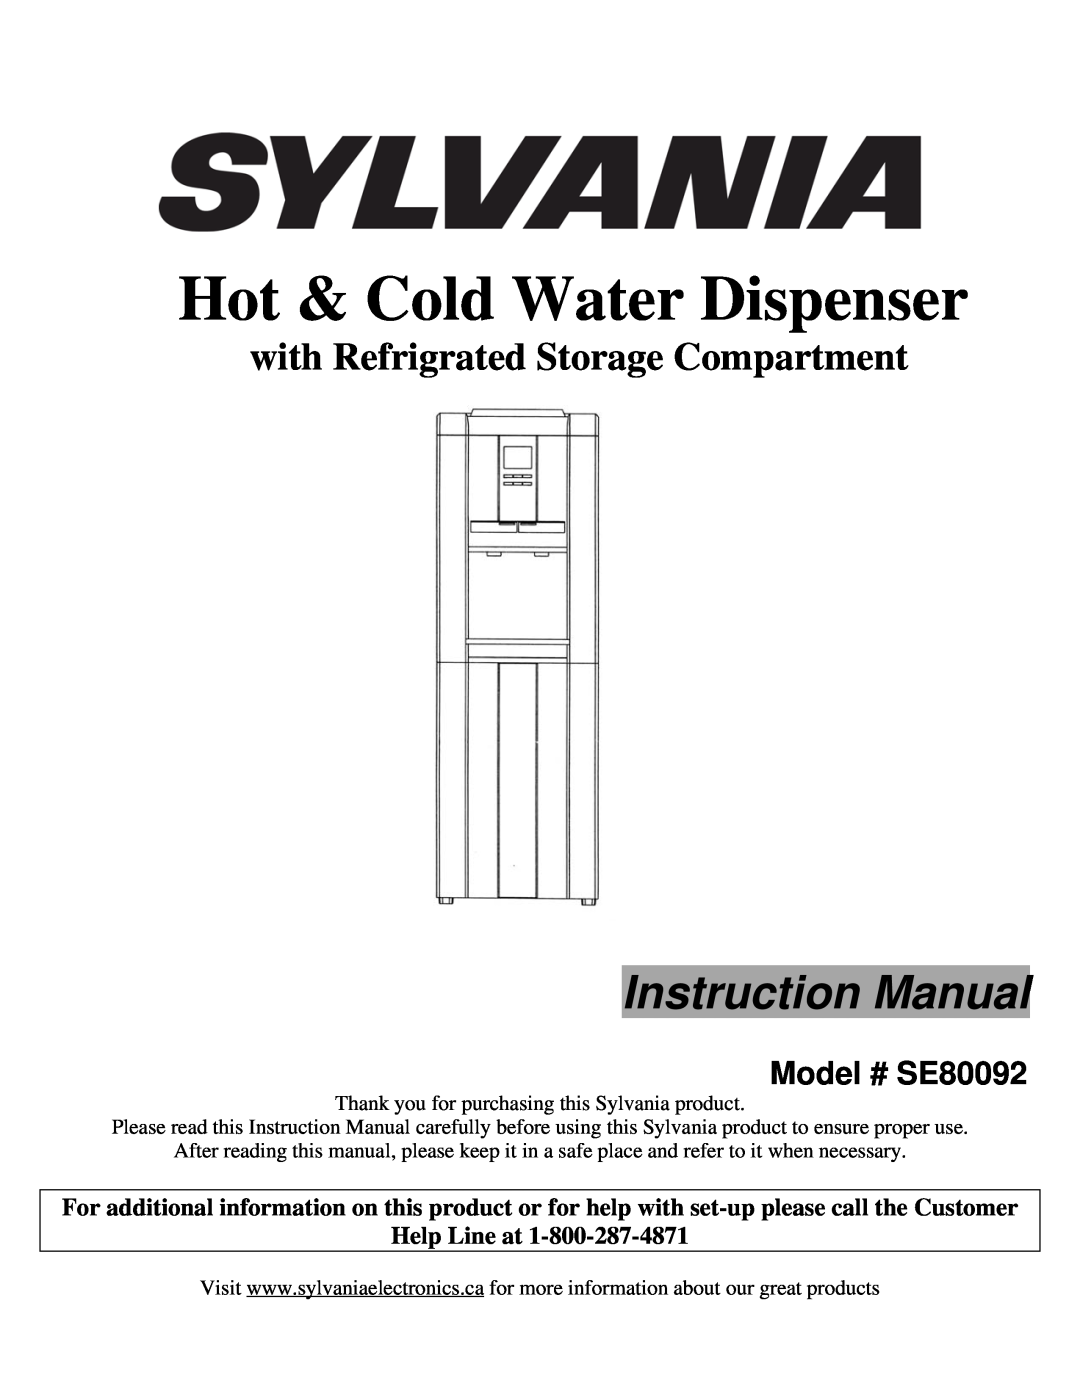 Sylvania instruction manual Model # SE80092, Hot & Cold Water Dispenser, with Refrigrated Storage Compartment 